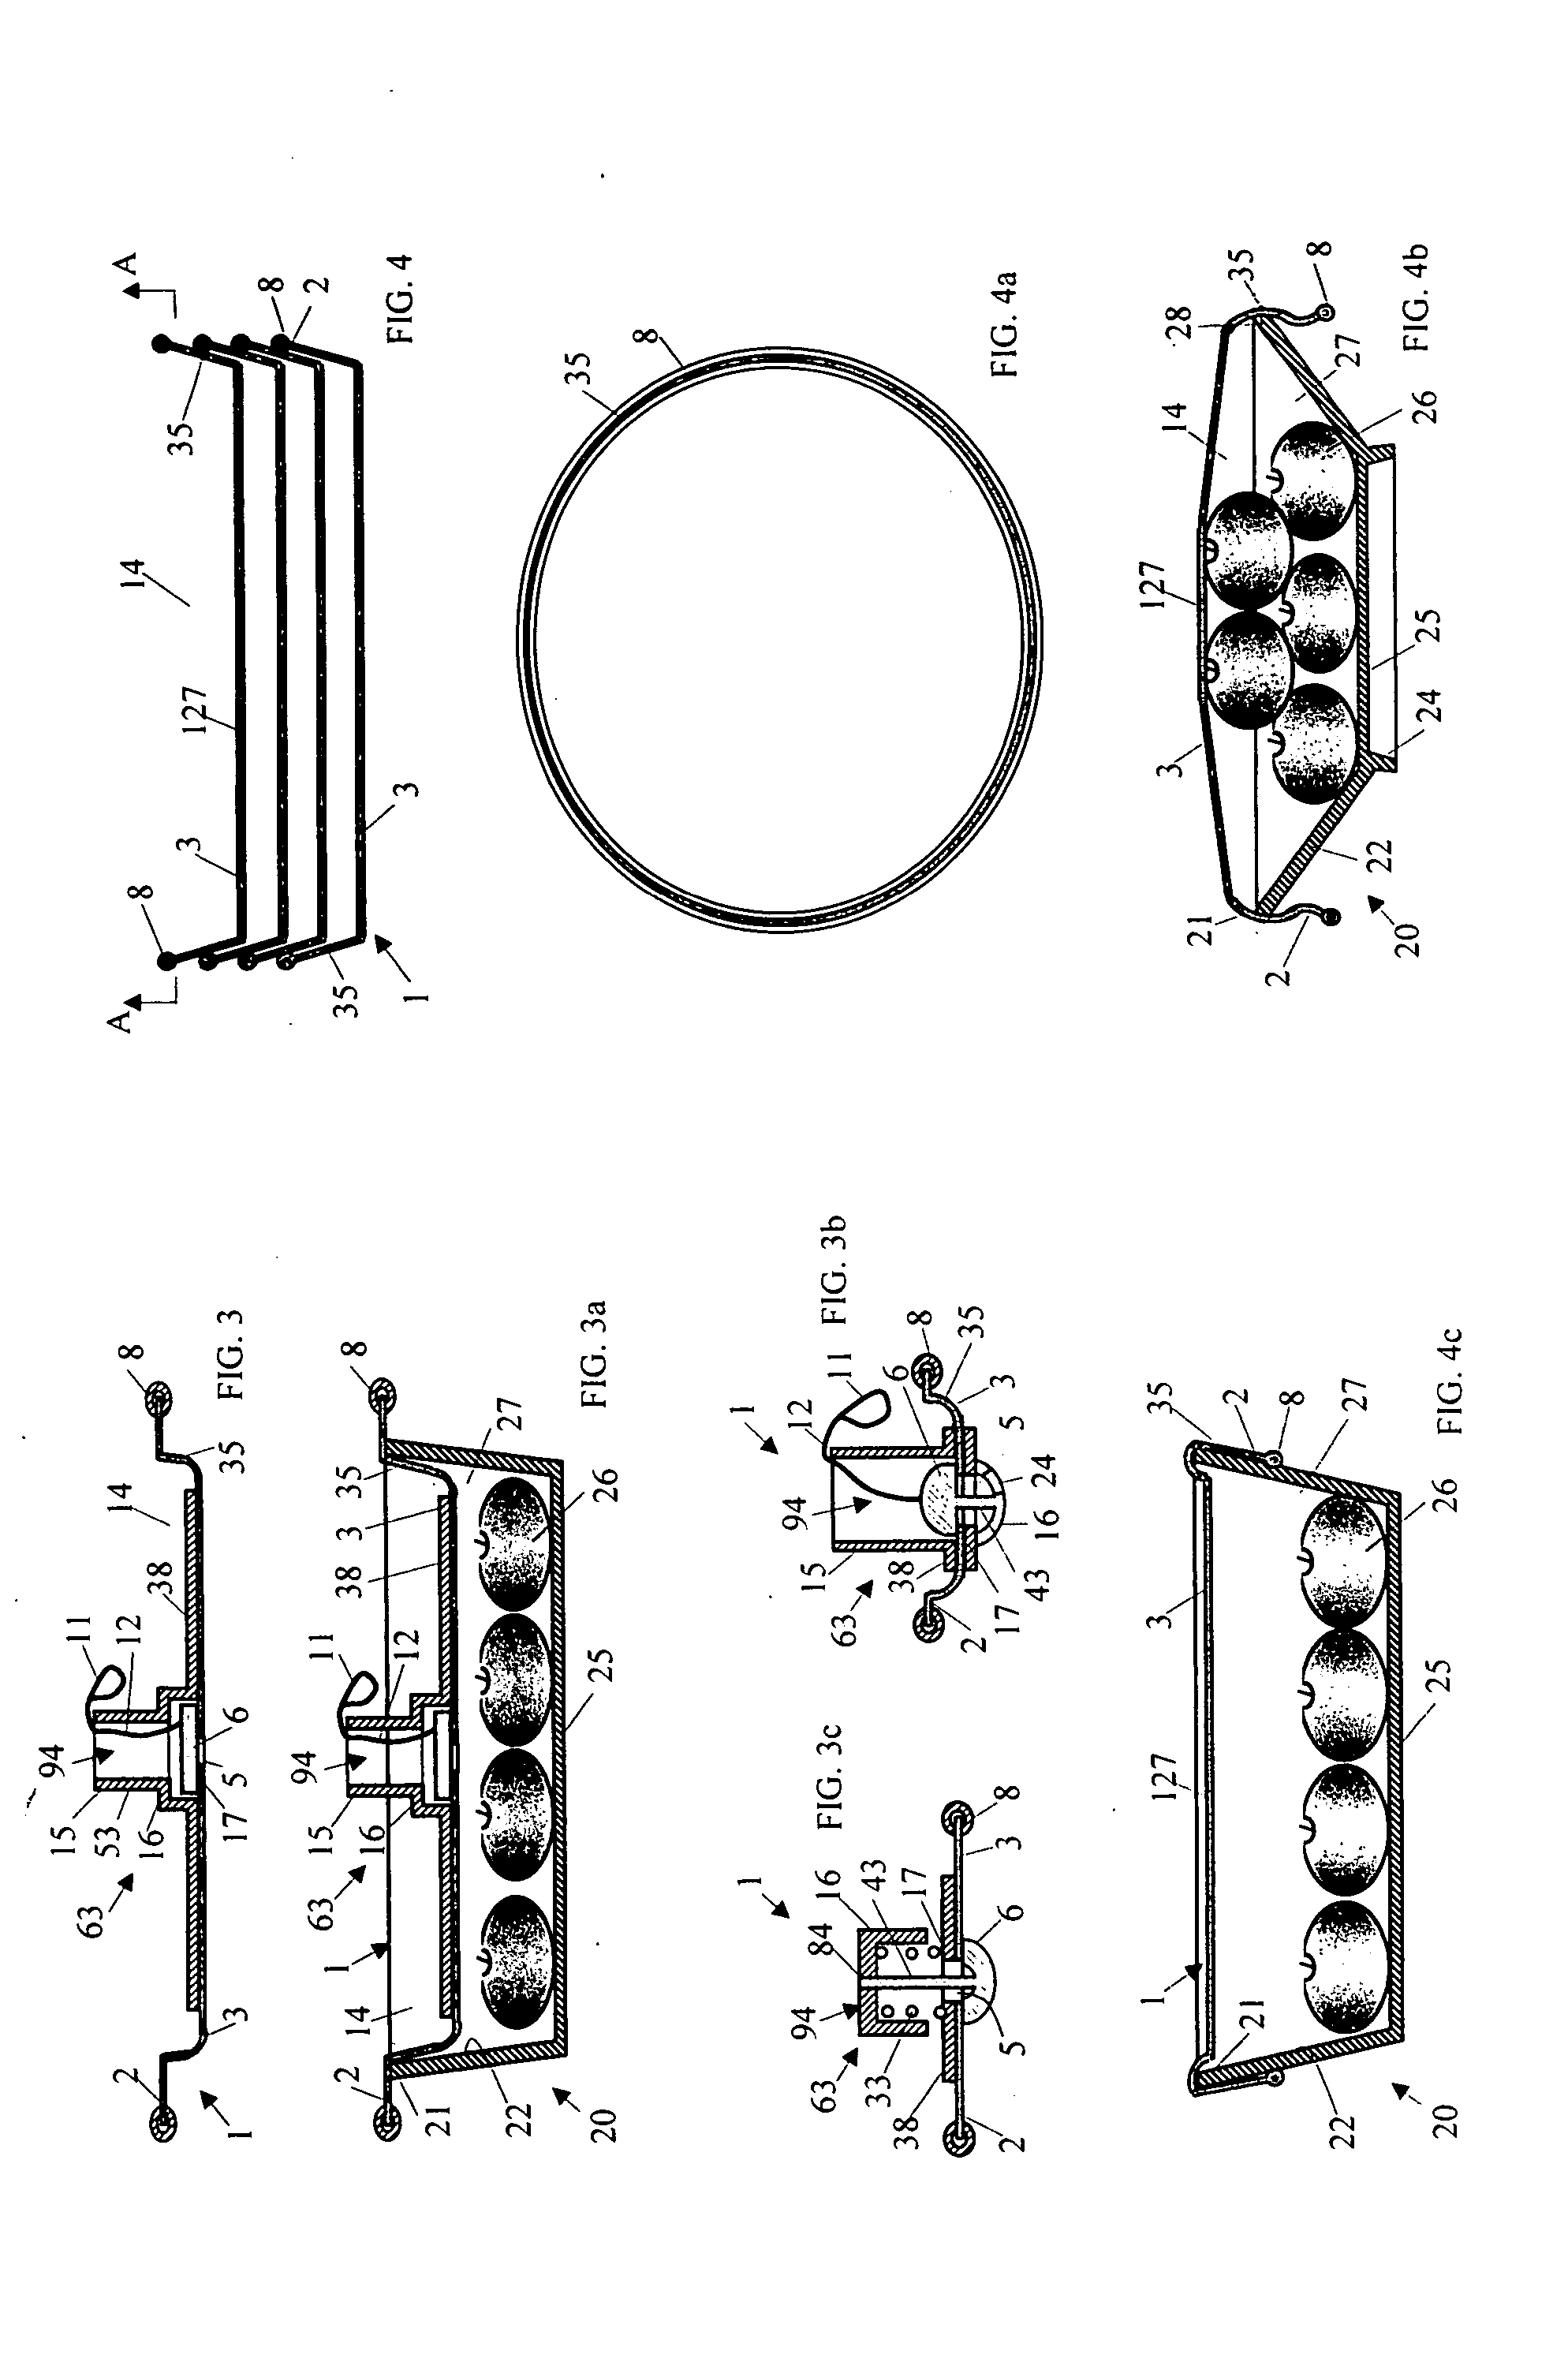 Airtight lid for container and method of use